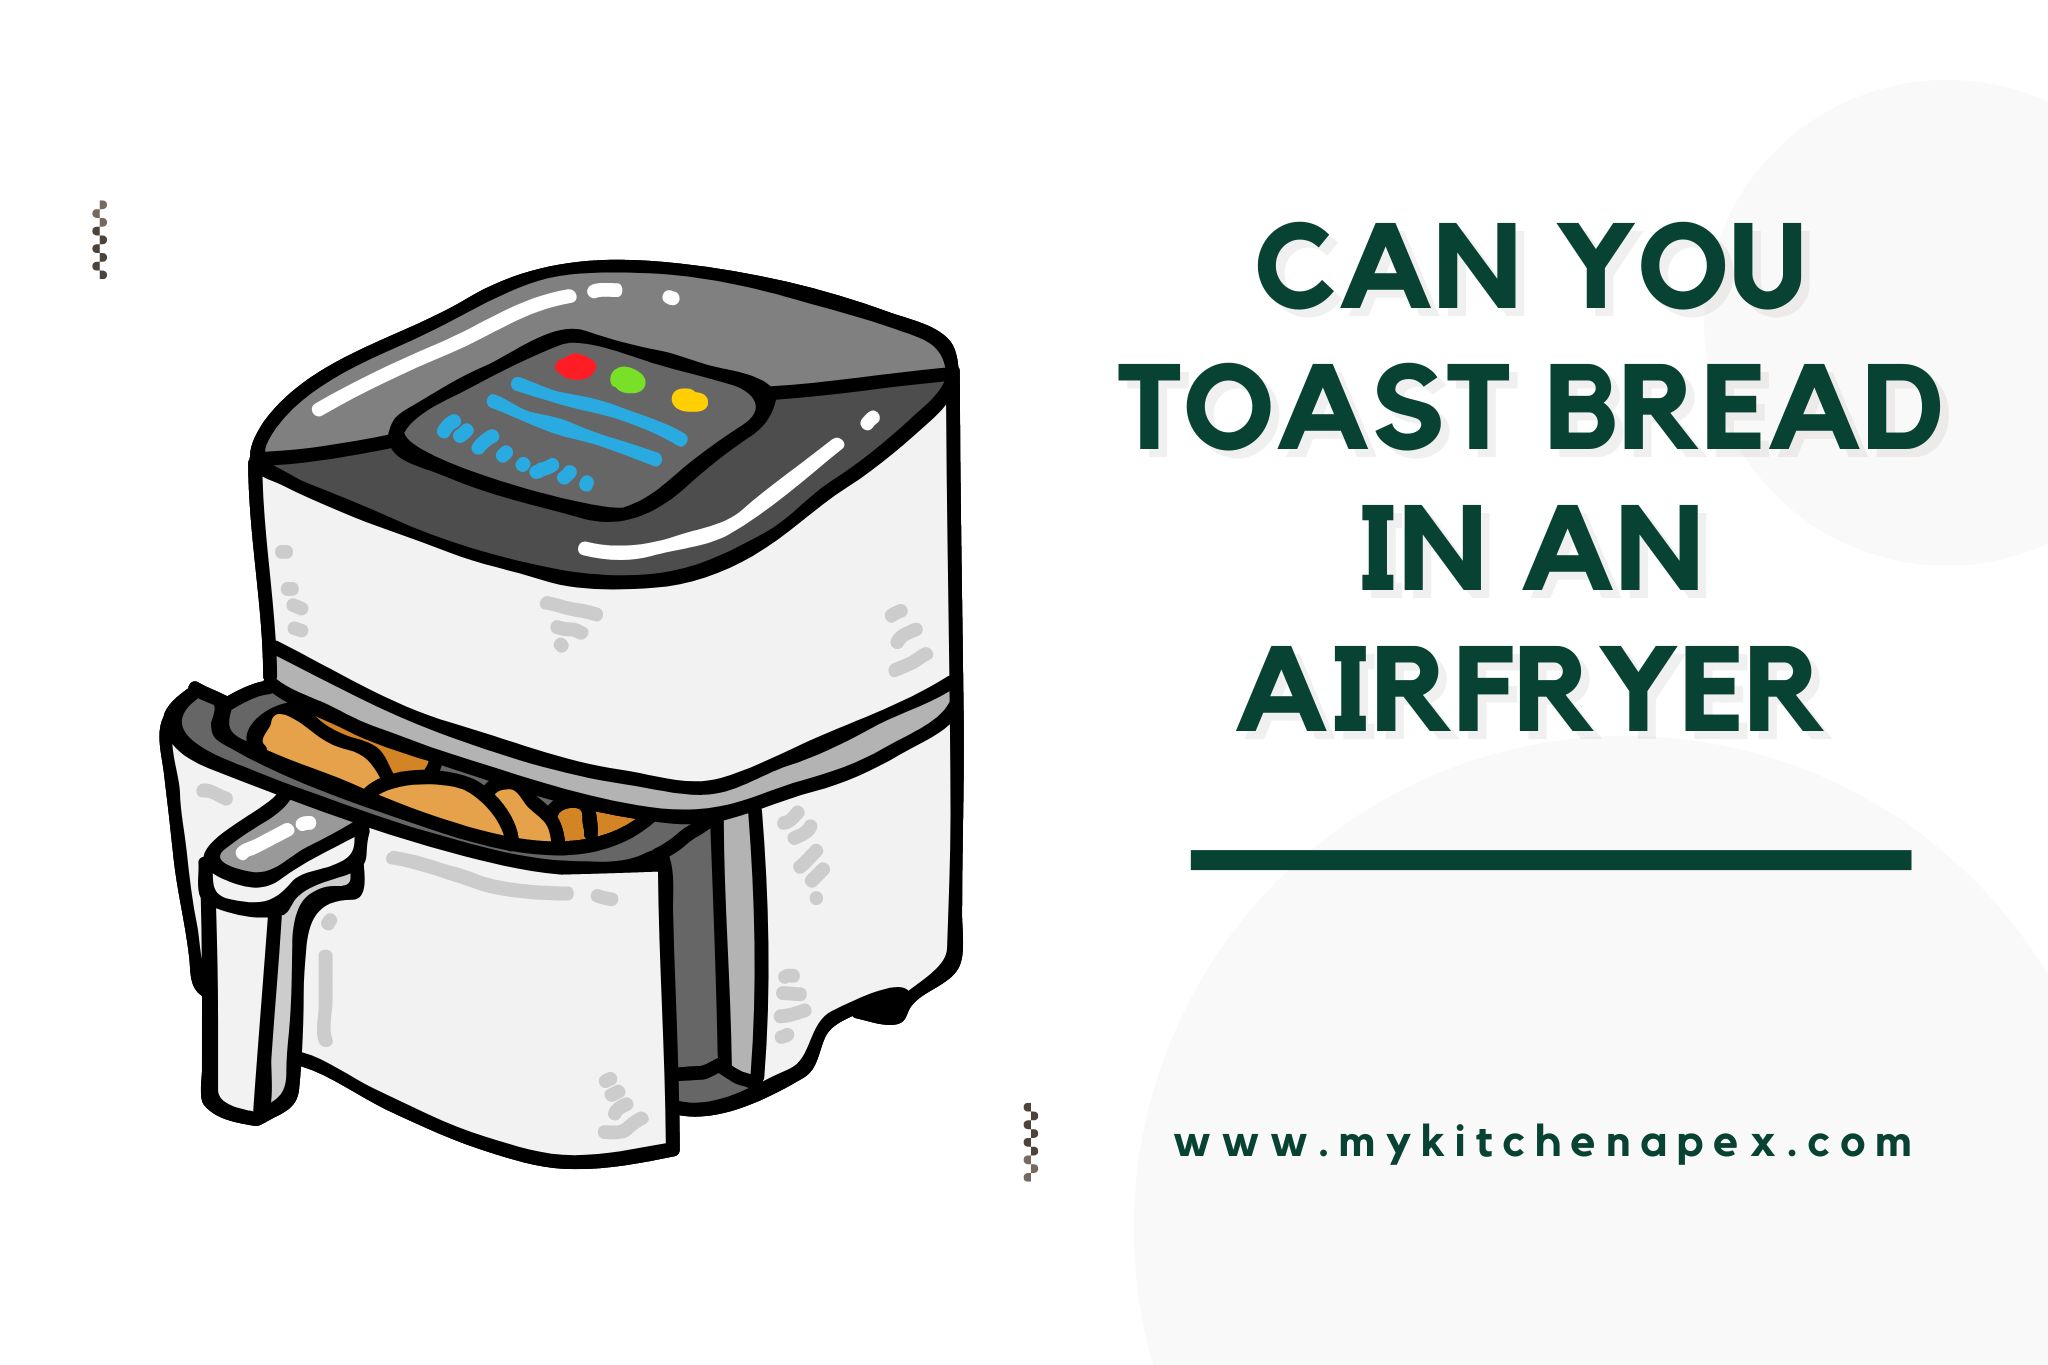 can you toast bread in an airfryer